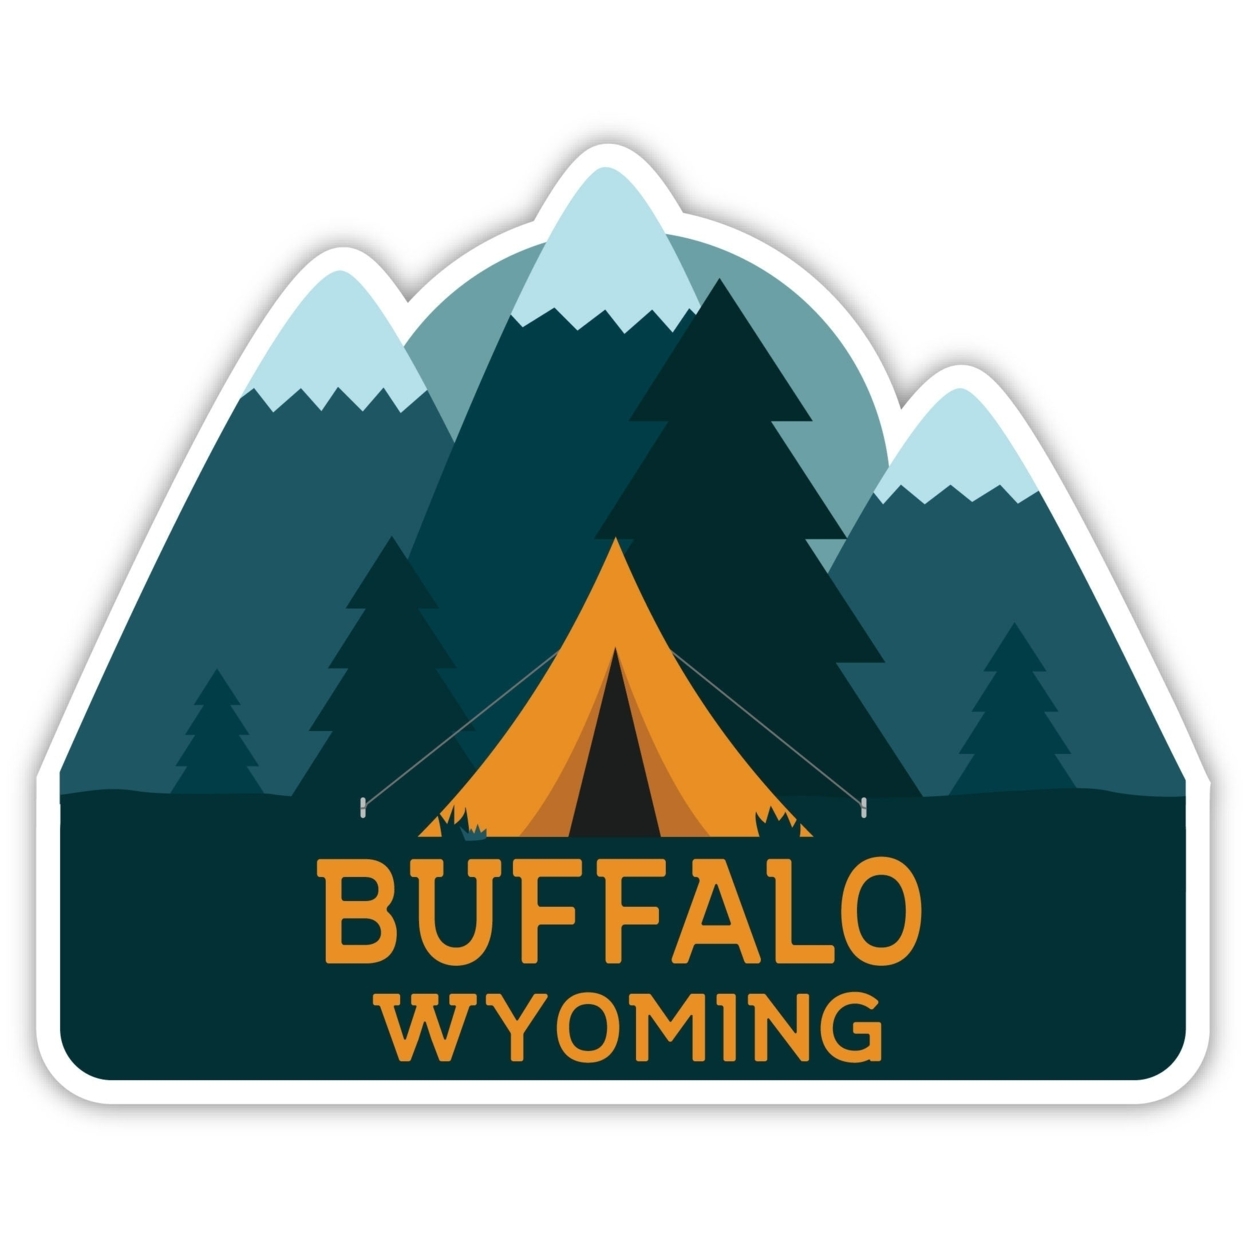 Buffalo Wyoming Souvenir Decorative Stickers (Choose Theme And Size) - 4-Pack, 10-Inch, Adventures Awaits